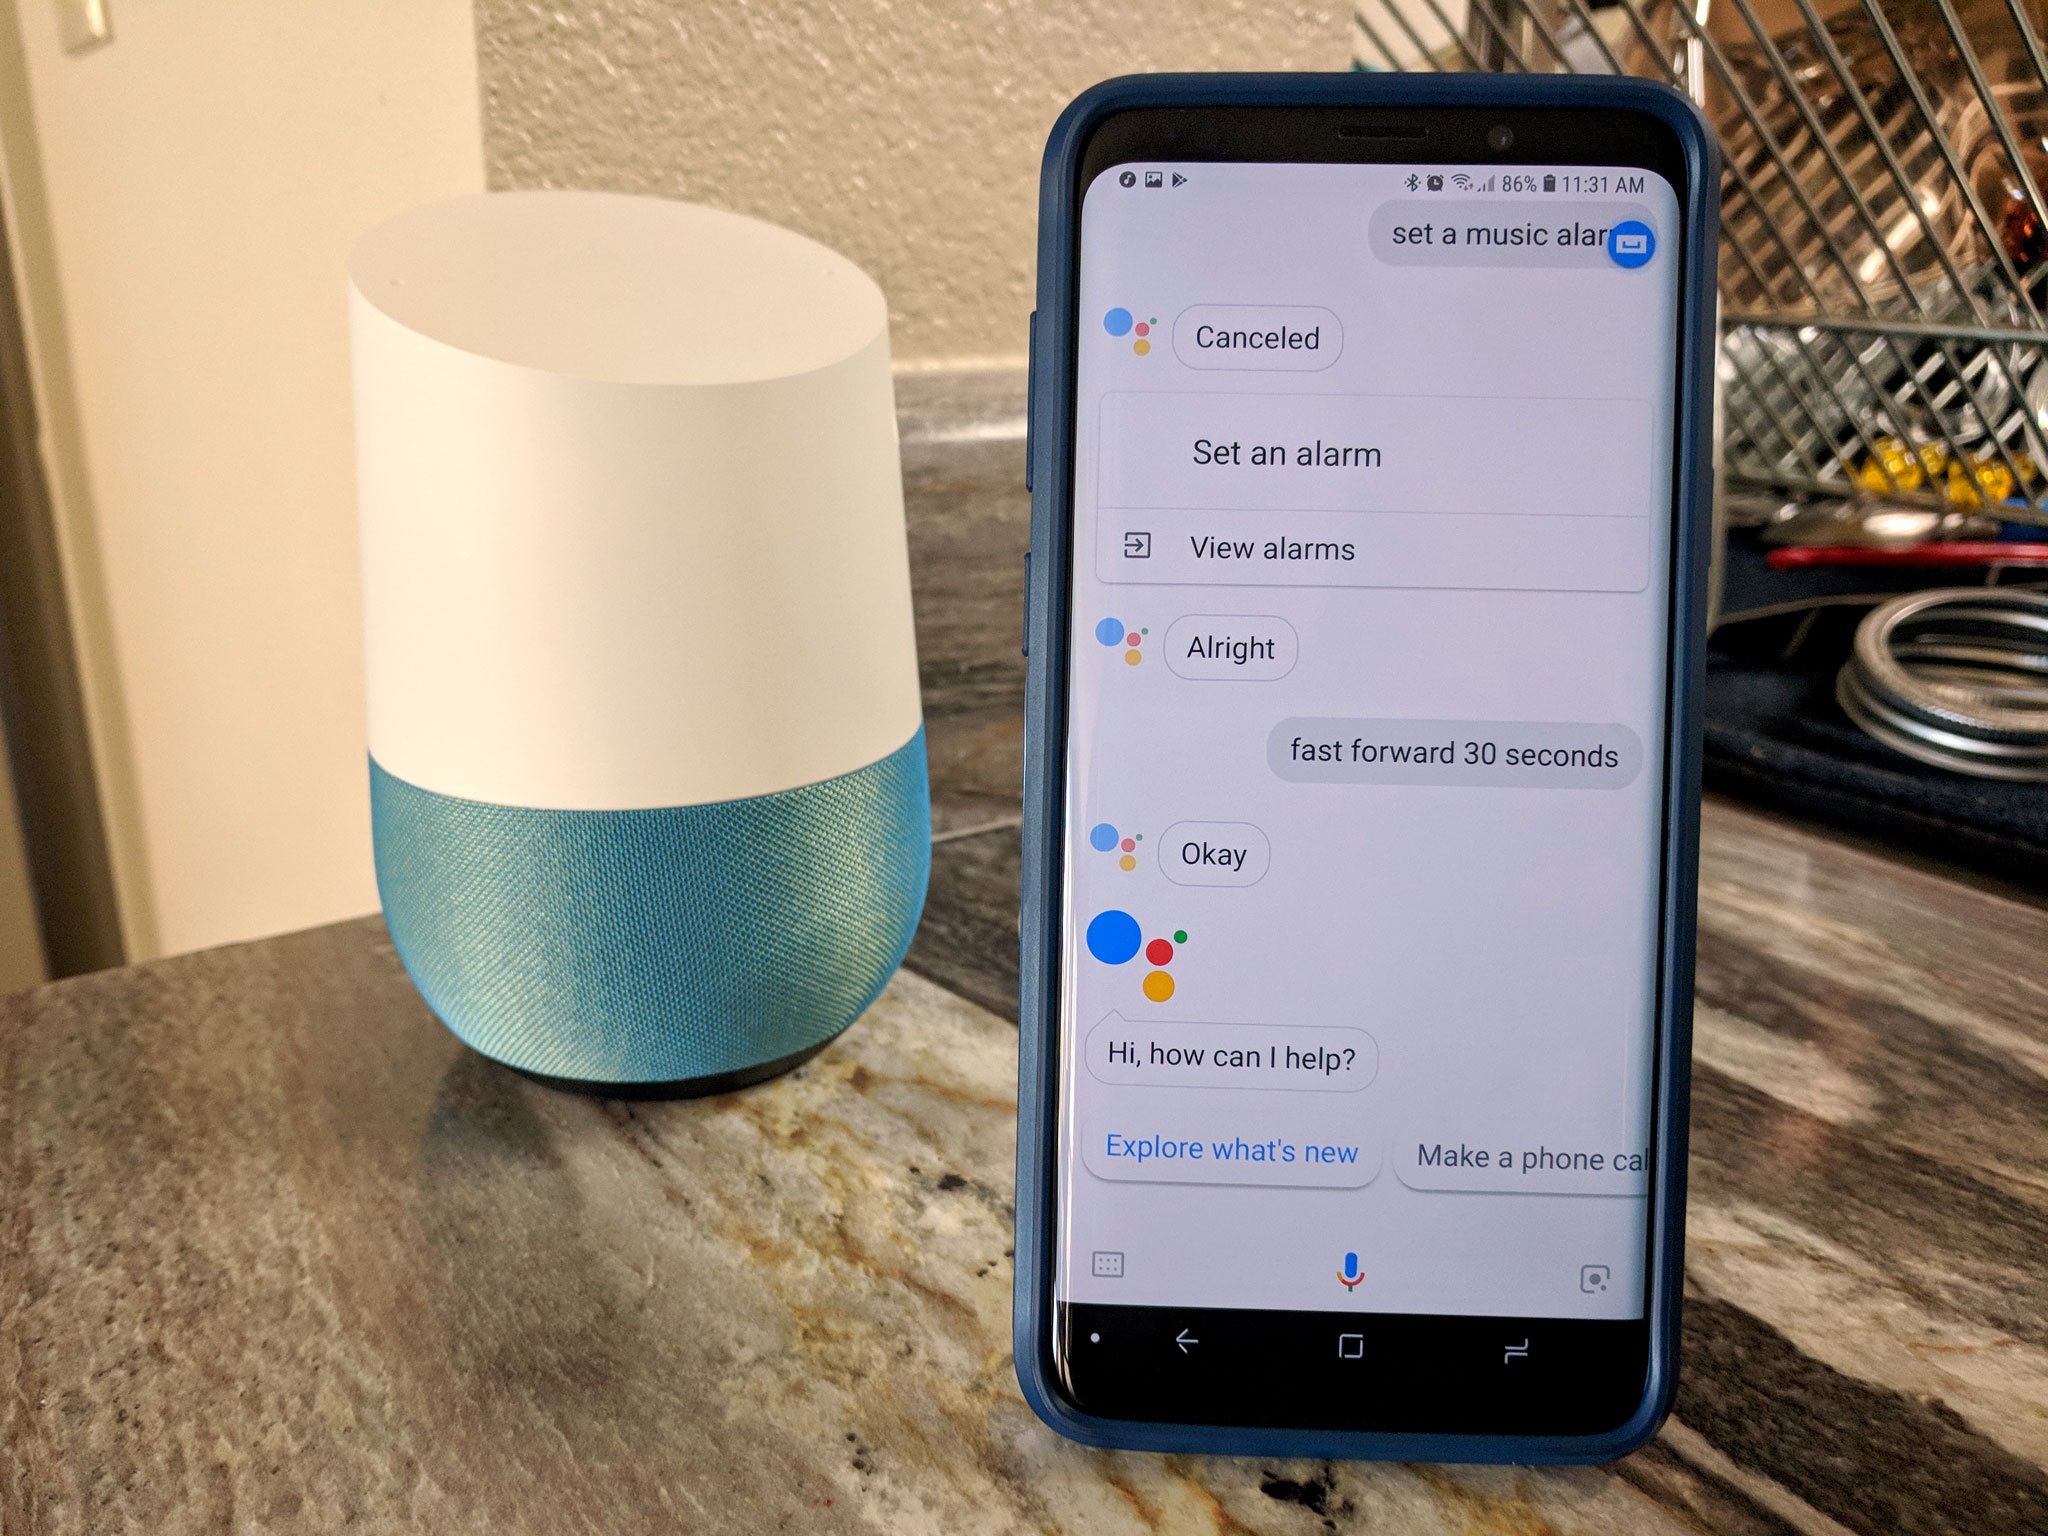 Google Home and Google Assistant finally offer the same experience